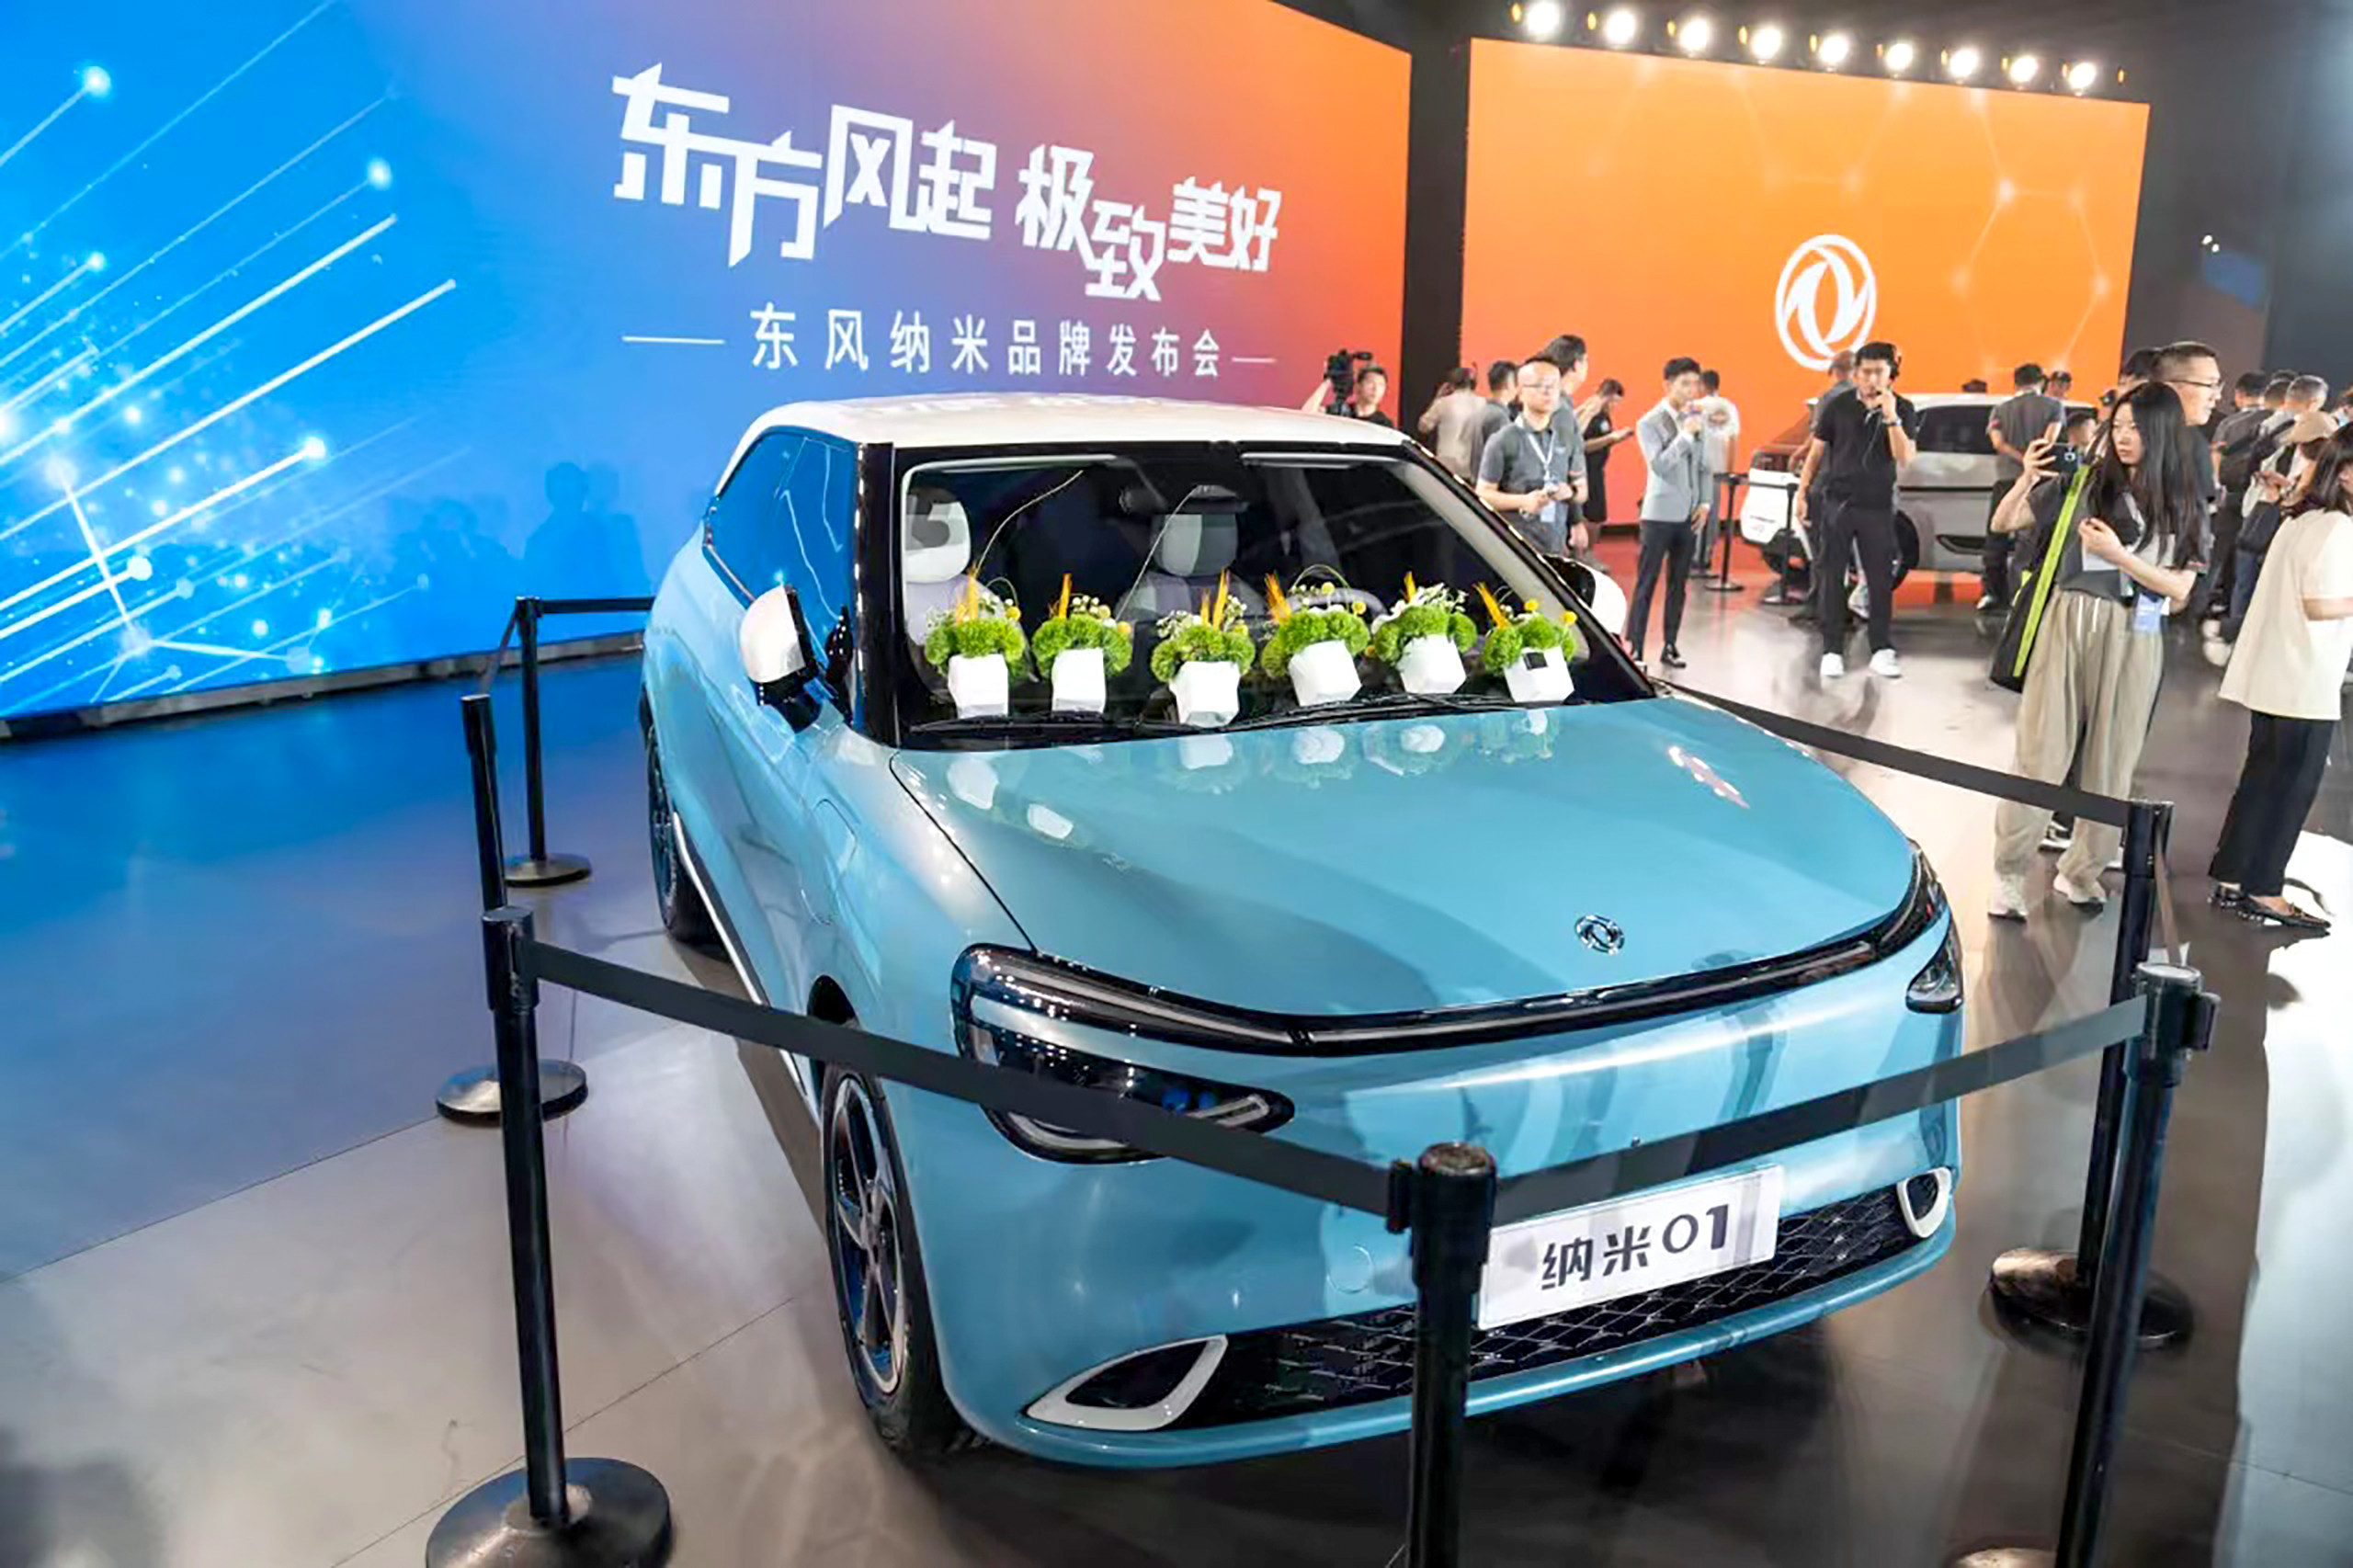 The Nammi compact EV was launched in Chengdu on Wednesday. Photo: Handout